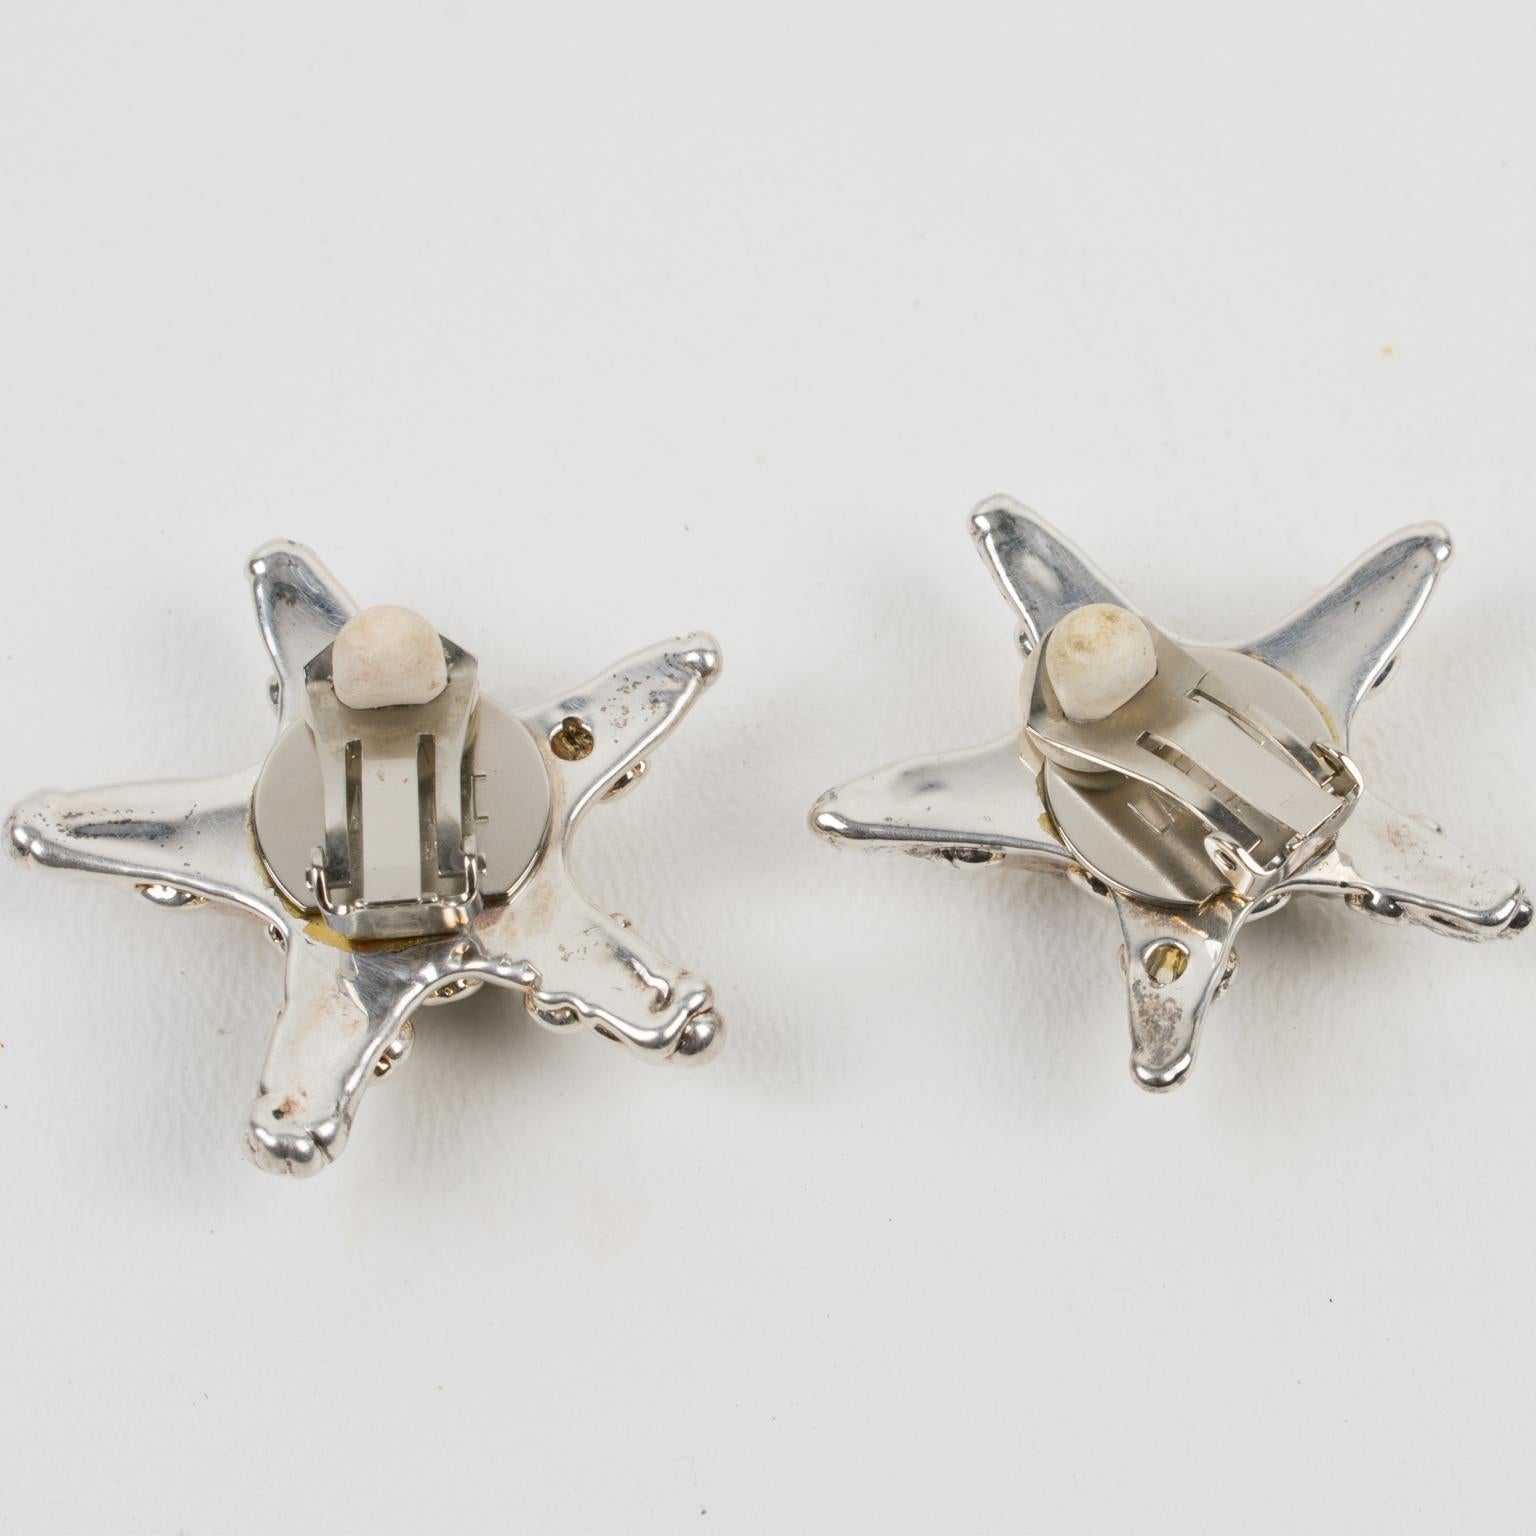  Alexis Lahellec Paris Clip Earrings Silvered Resin Starfish In Excellent Condition For Sale In Atlanta, GA